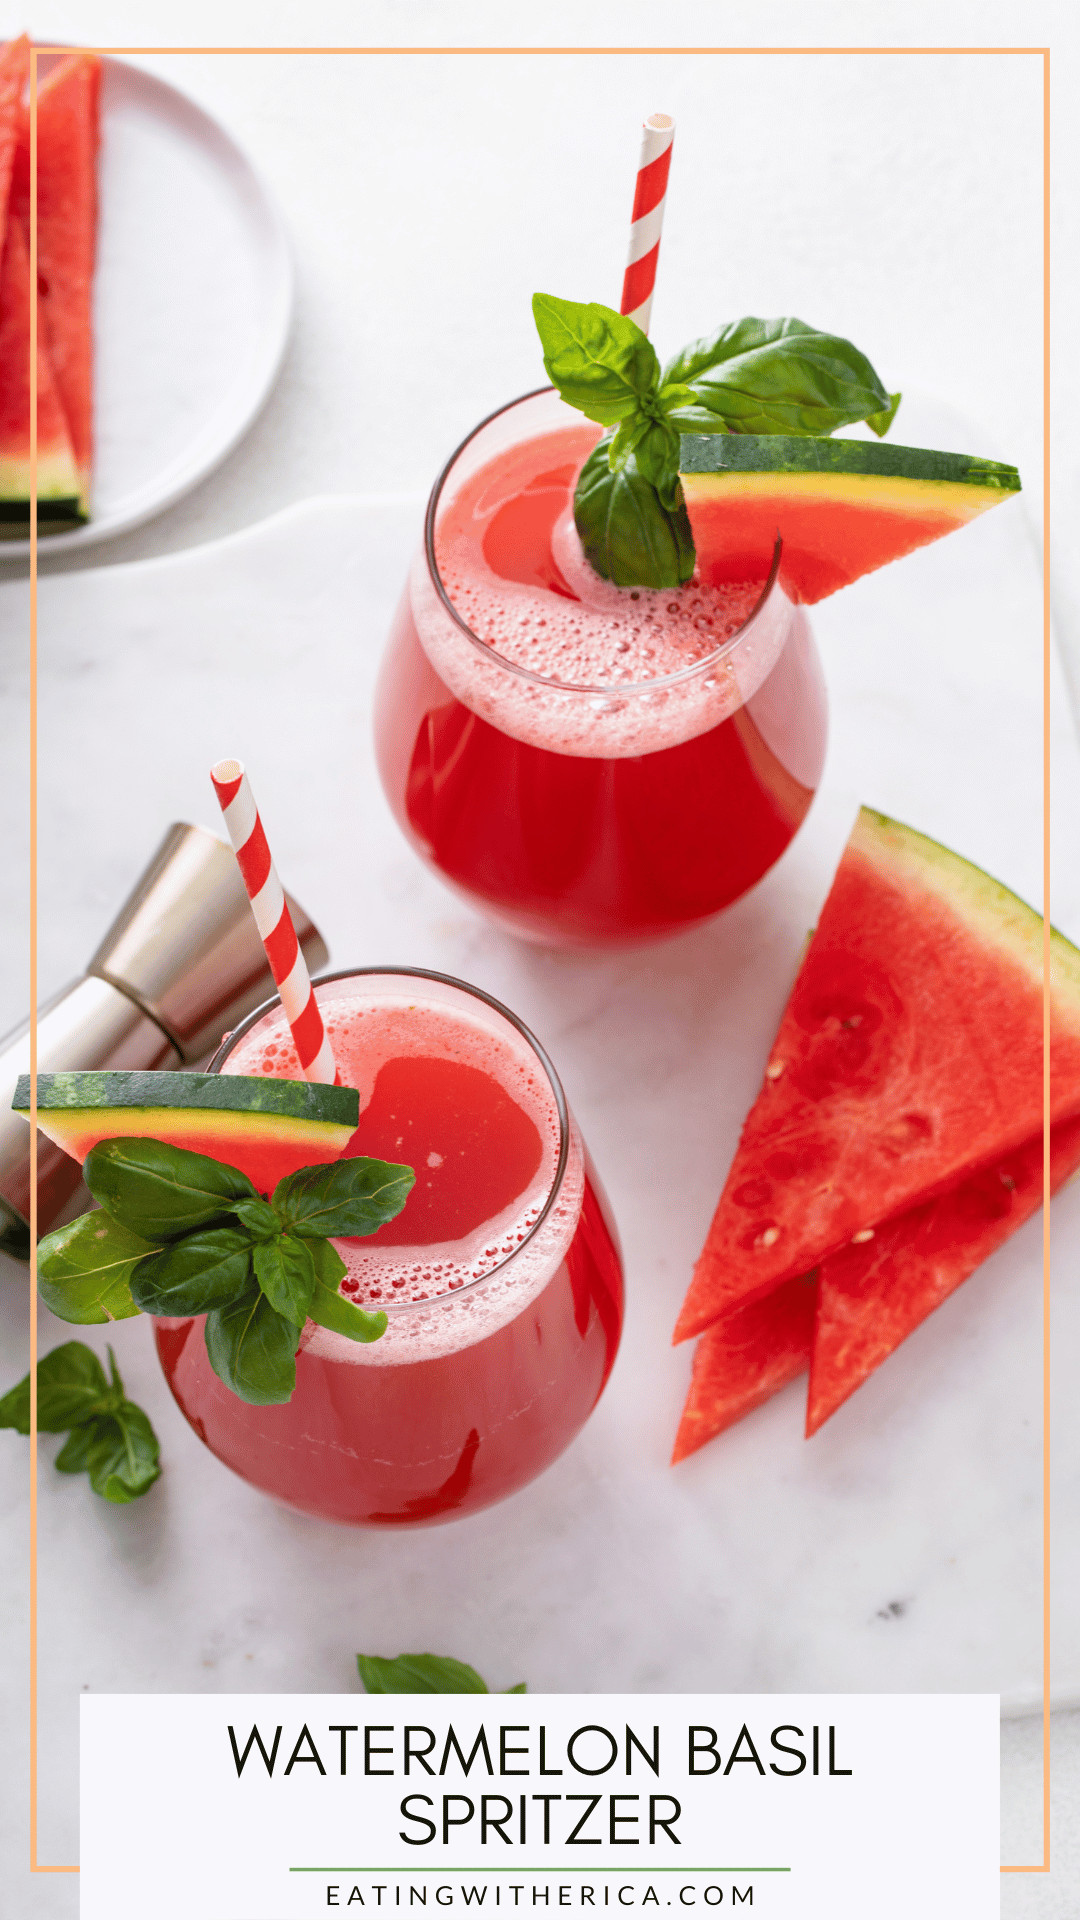 Looking for the perfect summertime cocktail? You have to try this deliciously refreshing Watermelon Basil Spritzer- click HERE to make it!